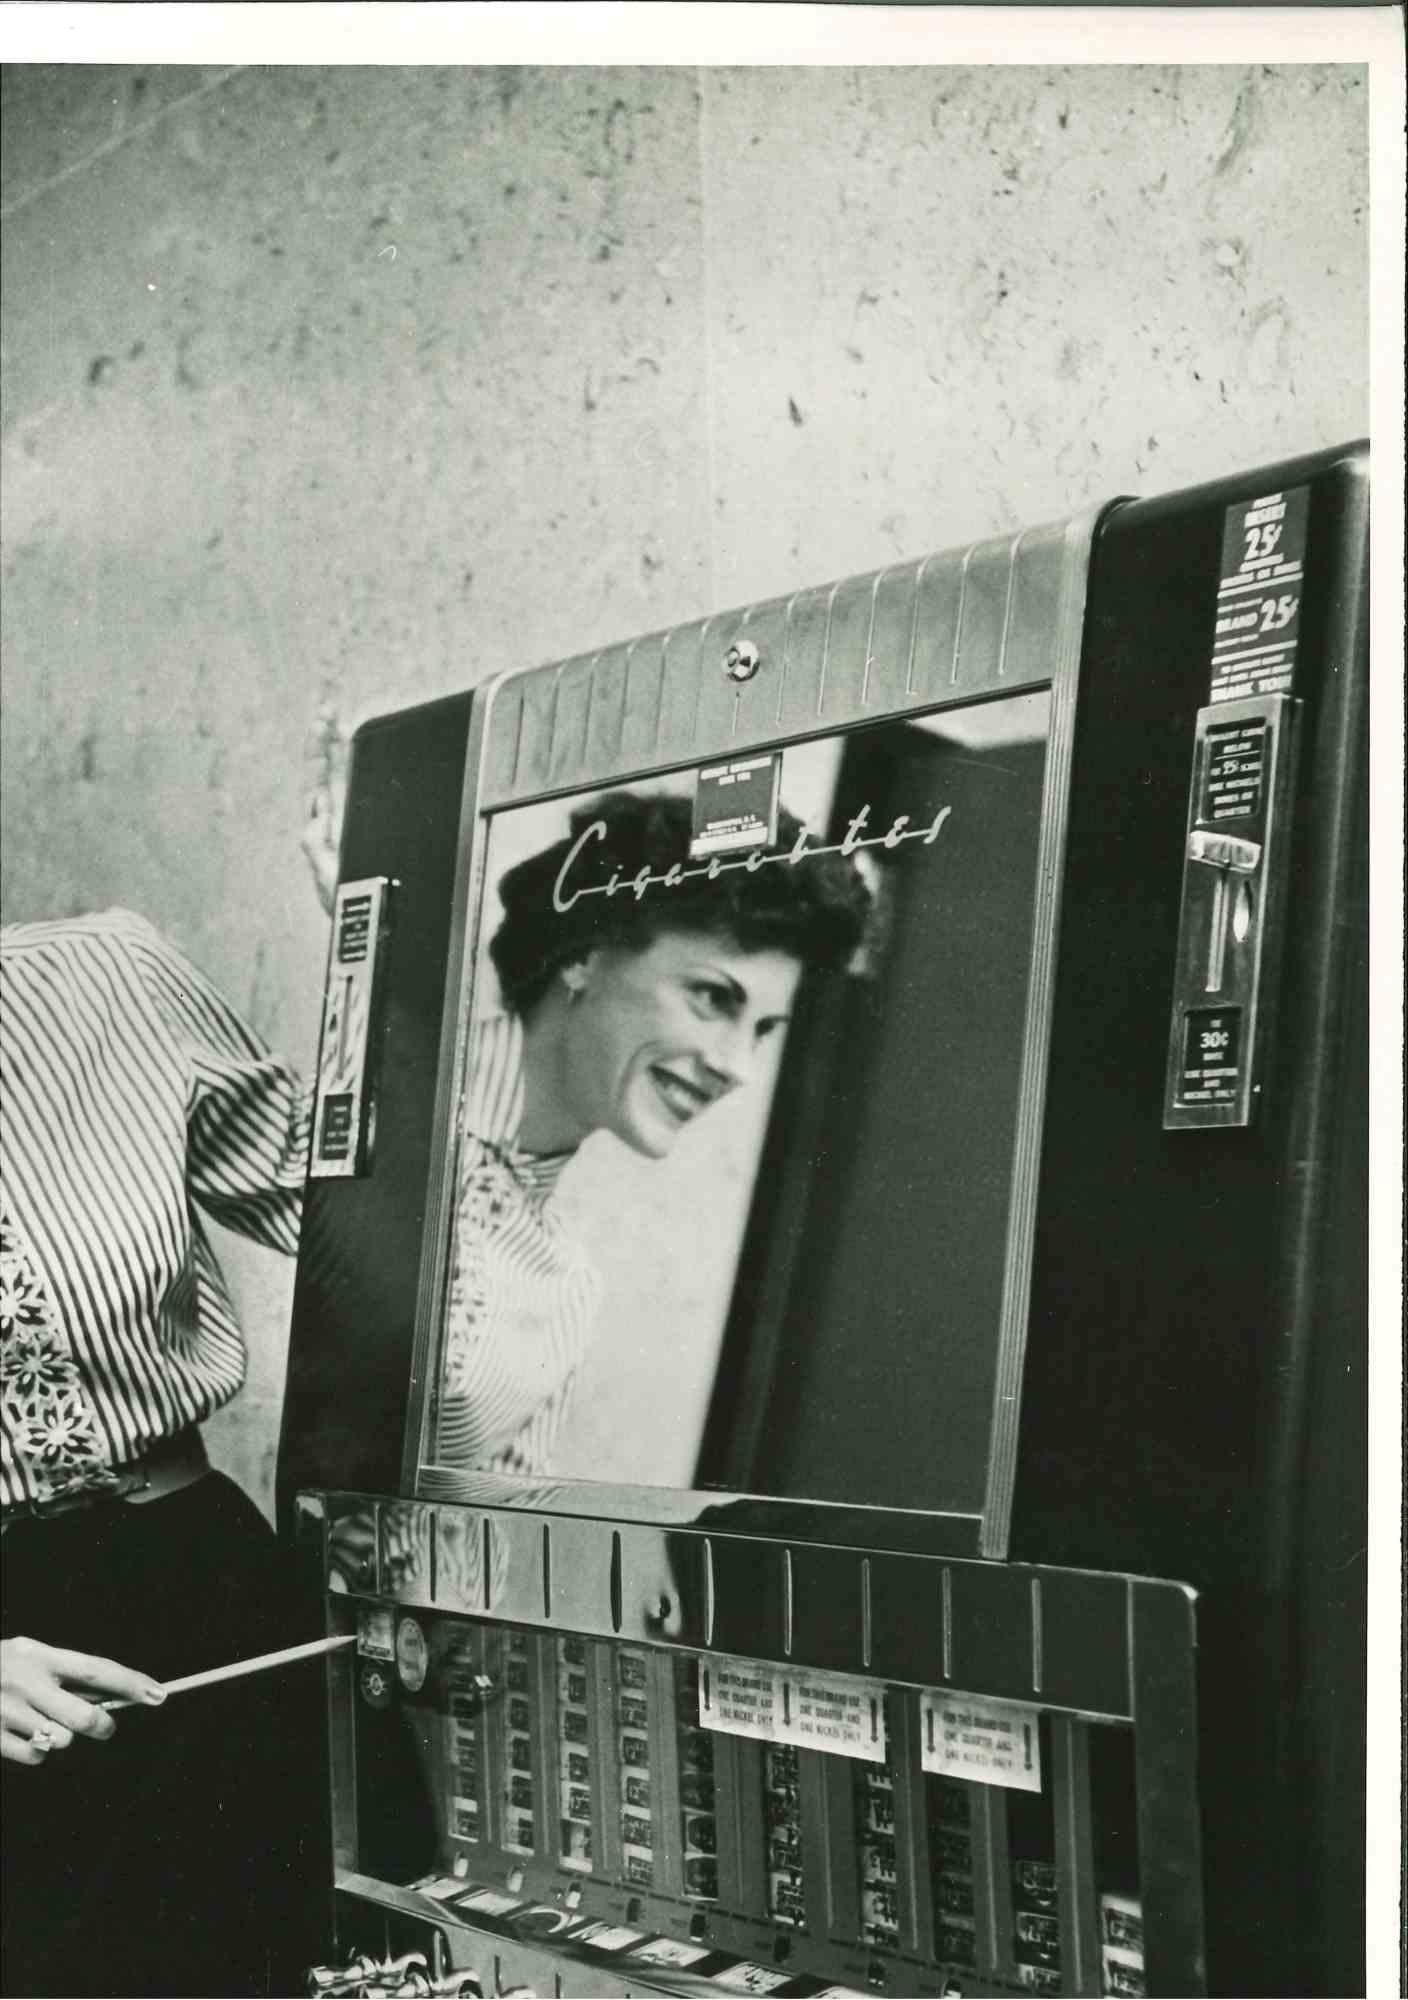 Unknown Figurative Photograph - Merchandising - American Vintage Photograph - Mid 20th Century